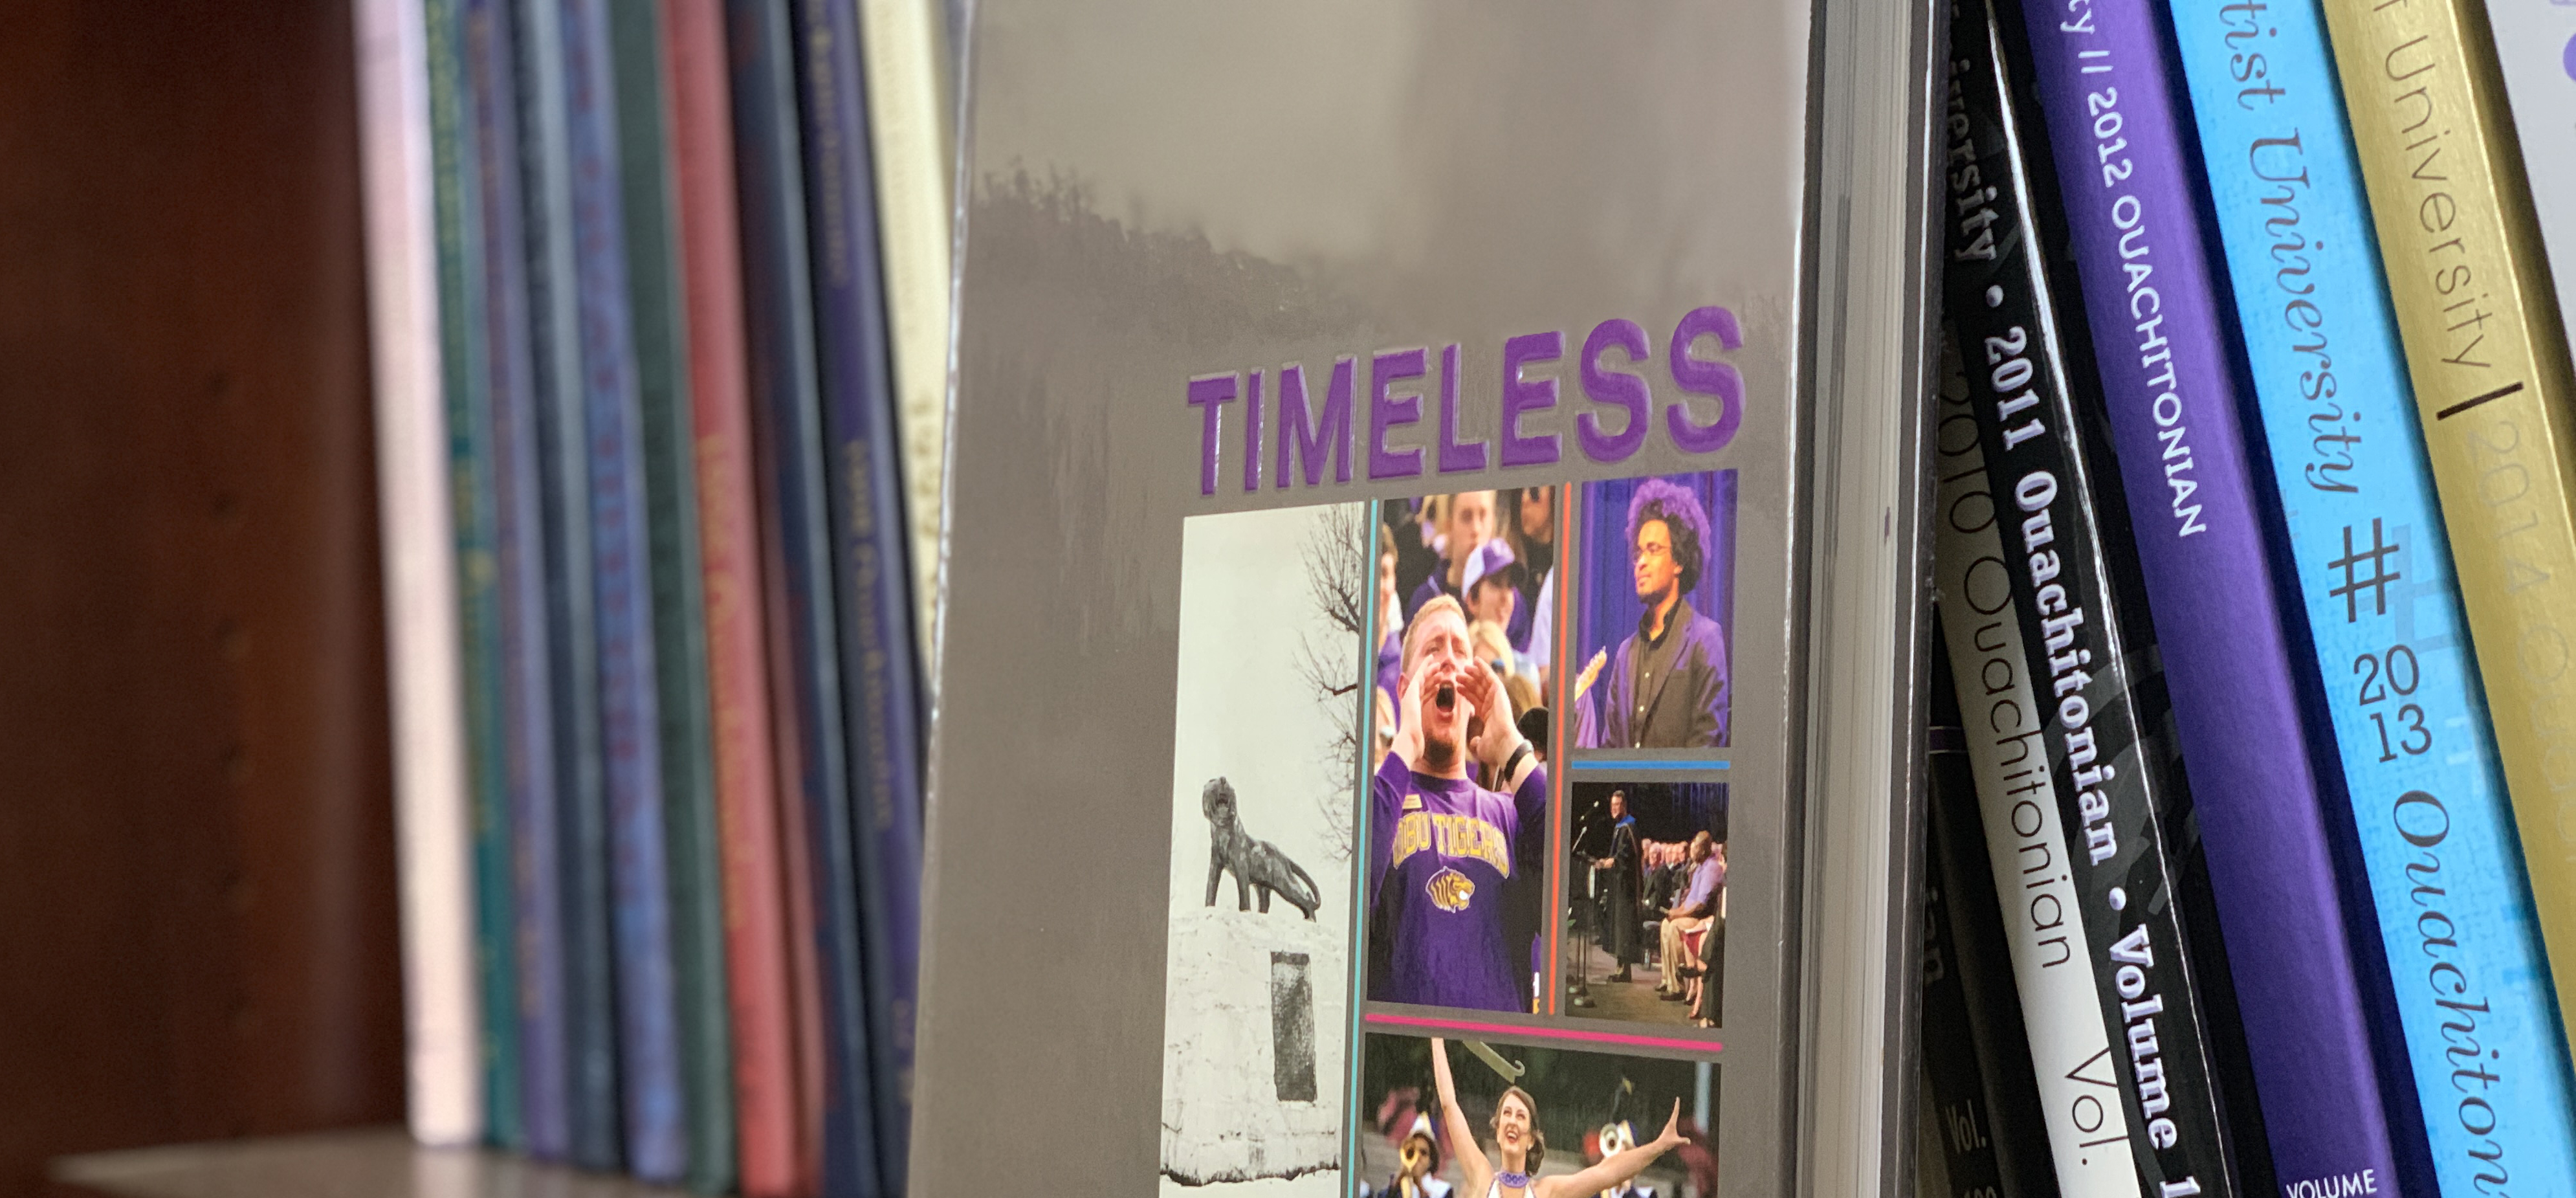 Ouachita yearbook one of five to receive national CSPA Crown Award.